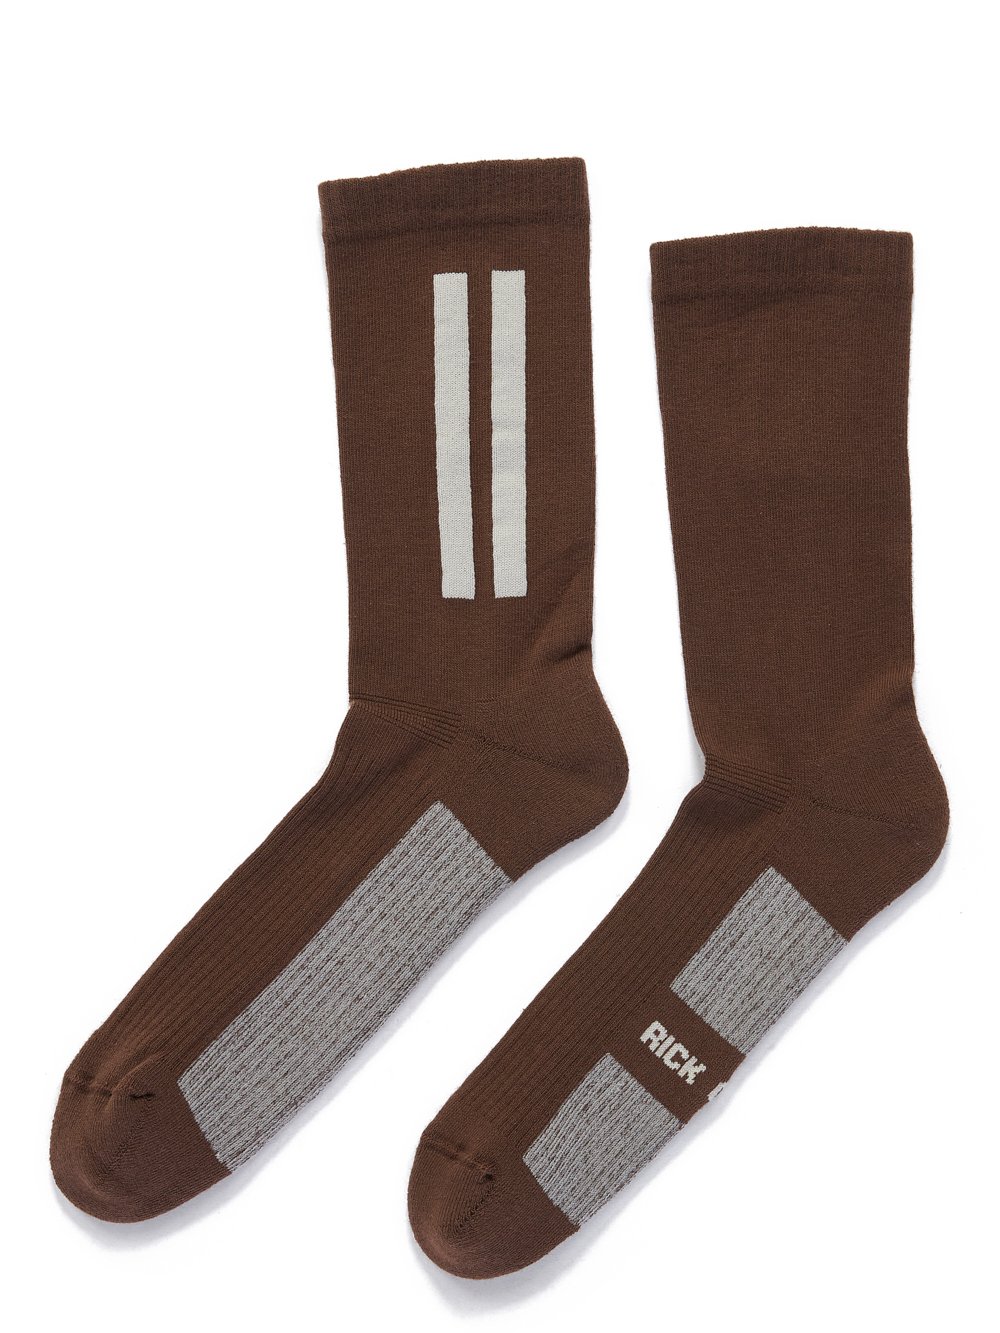 RICK OWENS FW23 LUXOR GLITTER SOCKS IN BROWN AND PEARL COTTON KNIT